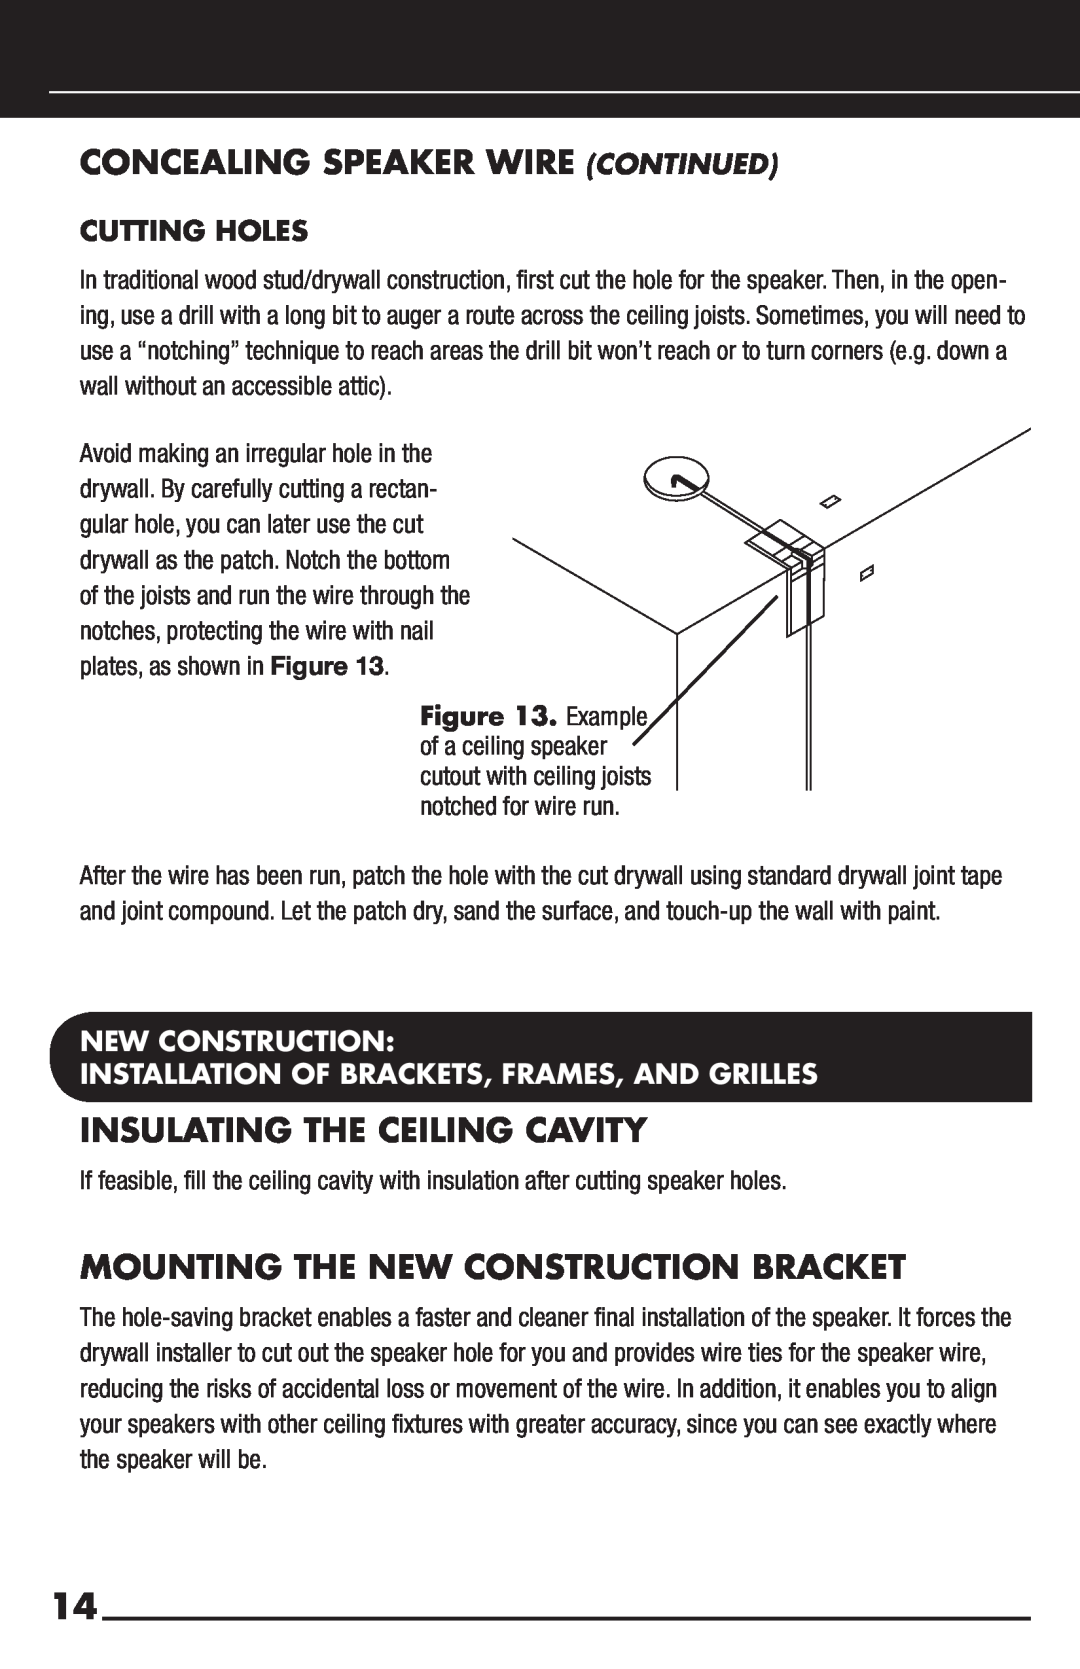 Niles Audio CM6HDFX manual Insulating The Ceiling Cavity, Mounting The New Construction Bracket, Cutting Holes 